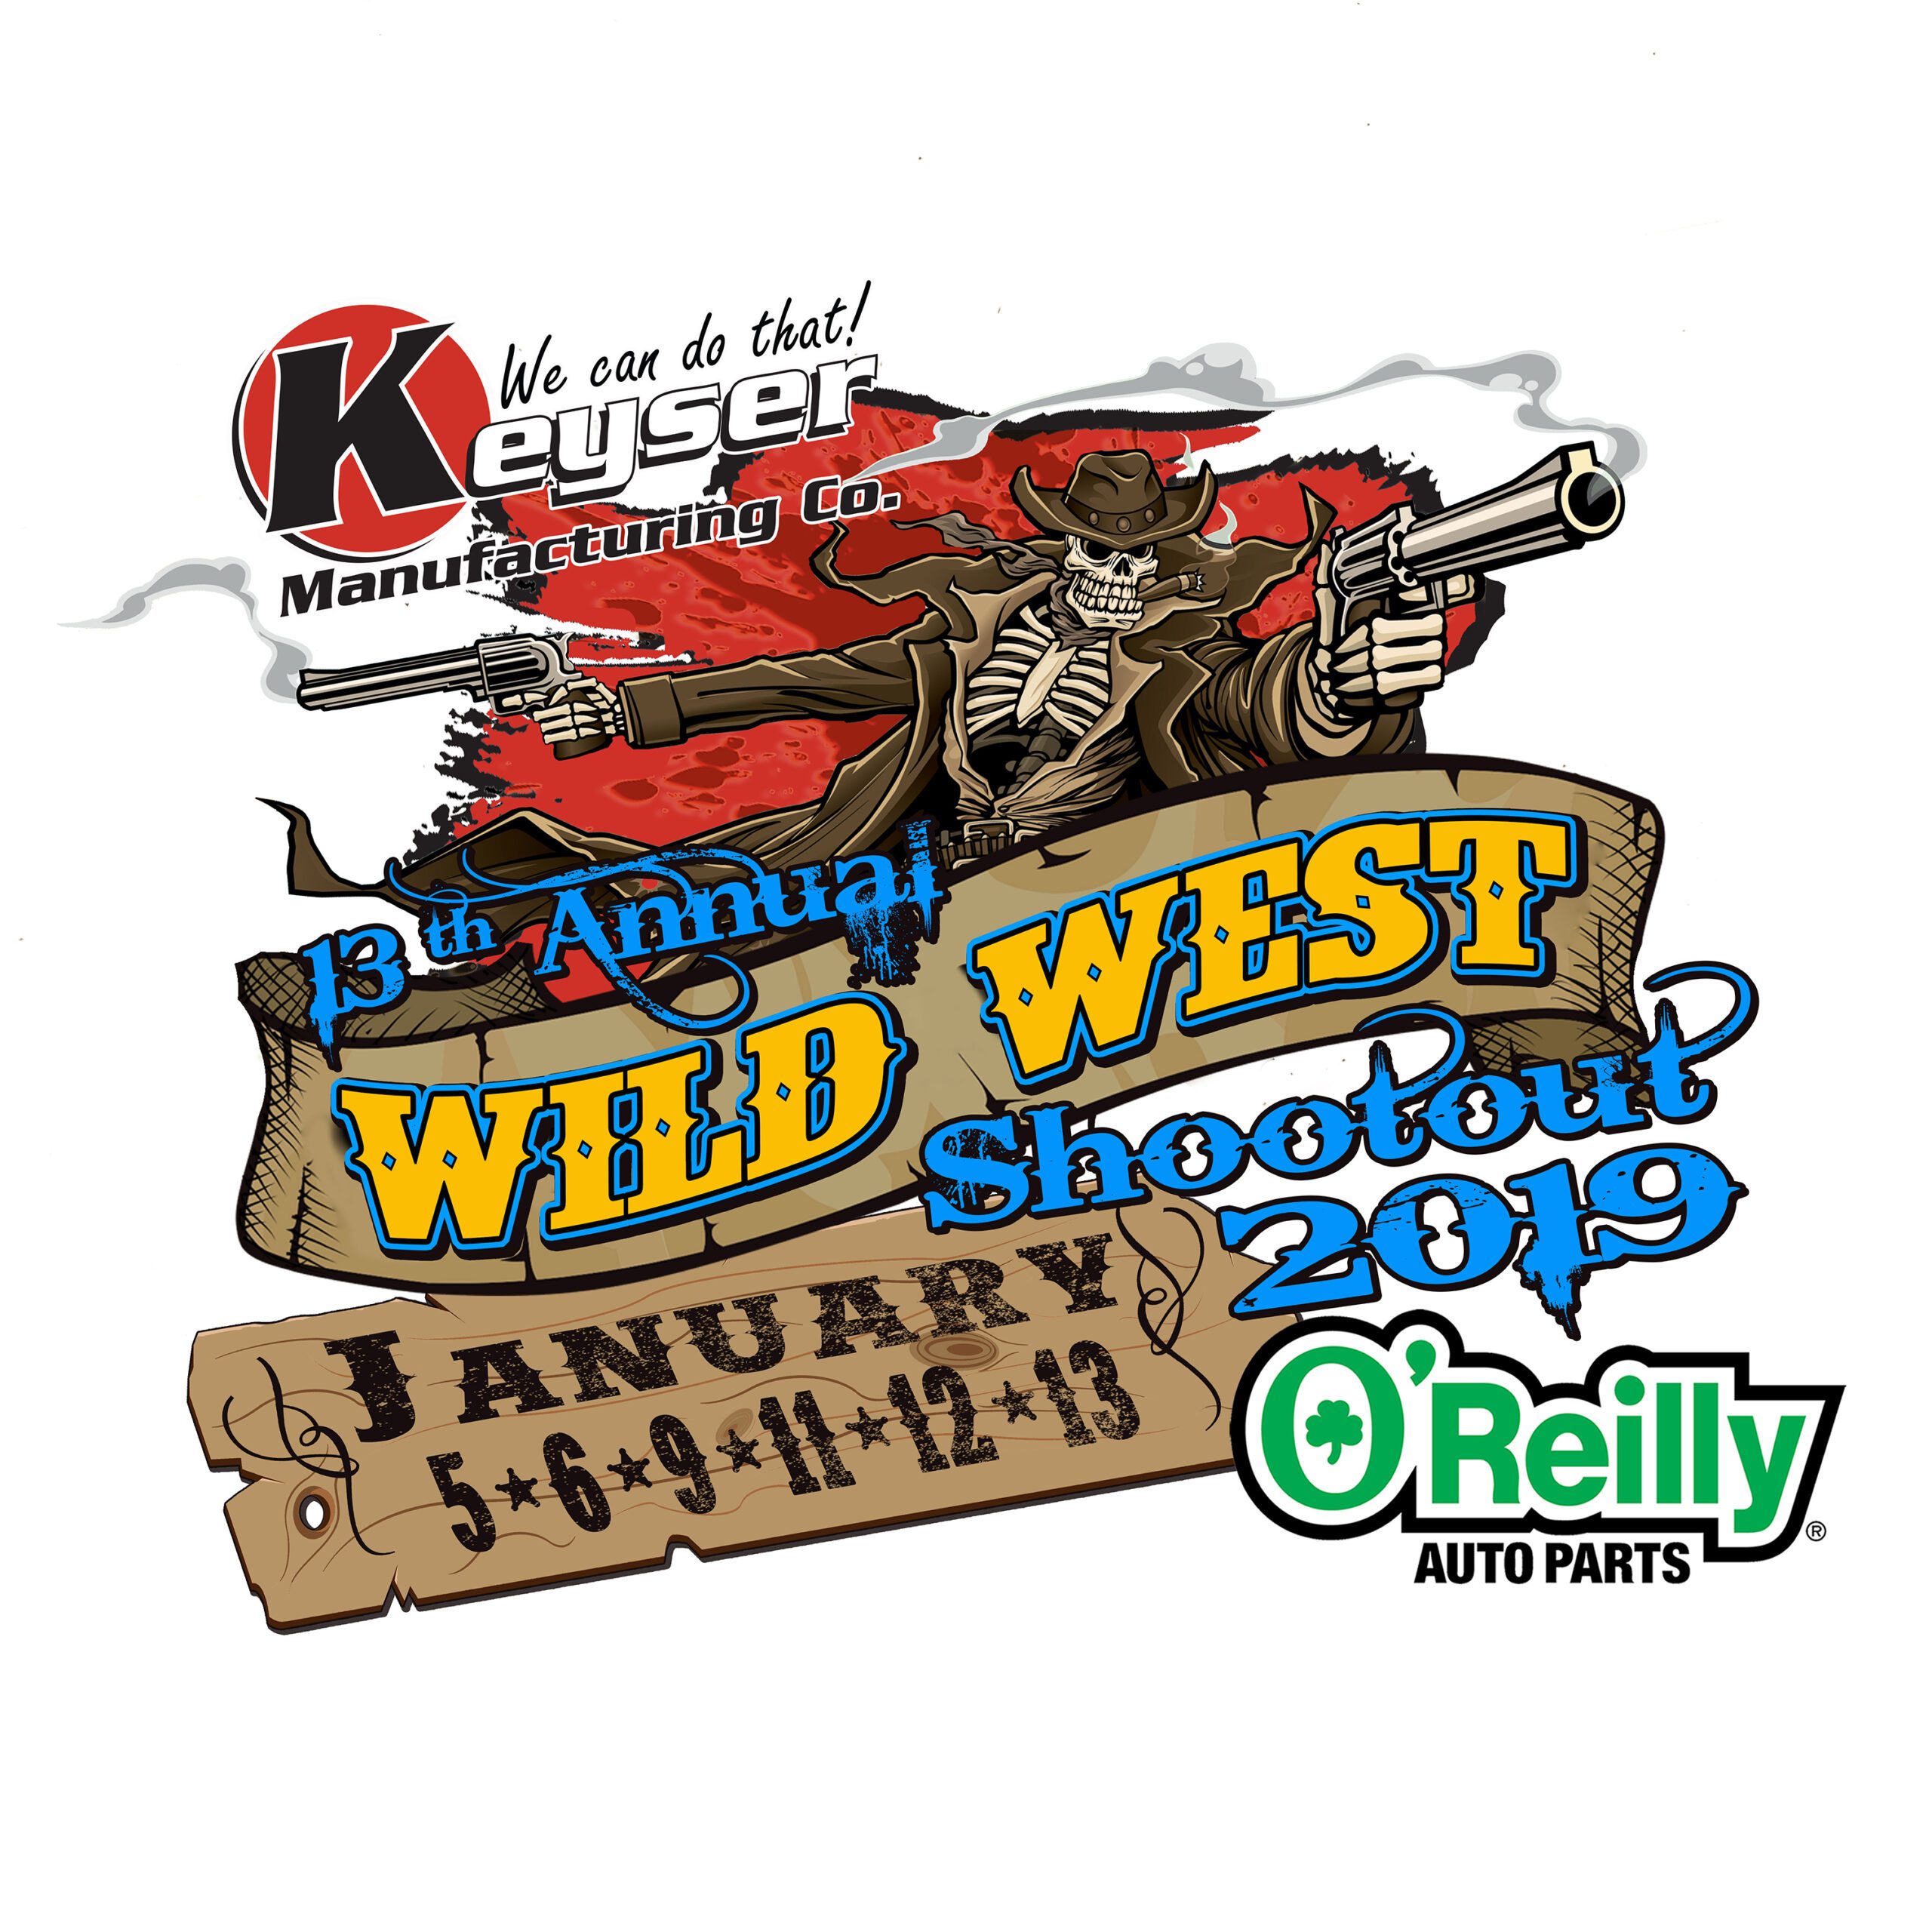 Wild West Shootout Sunday Round Two Postponed – Sets Up Saturday Double